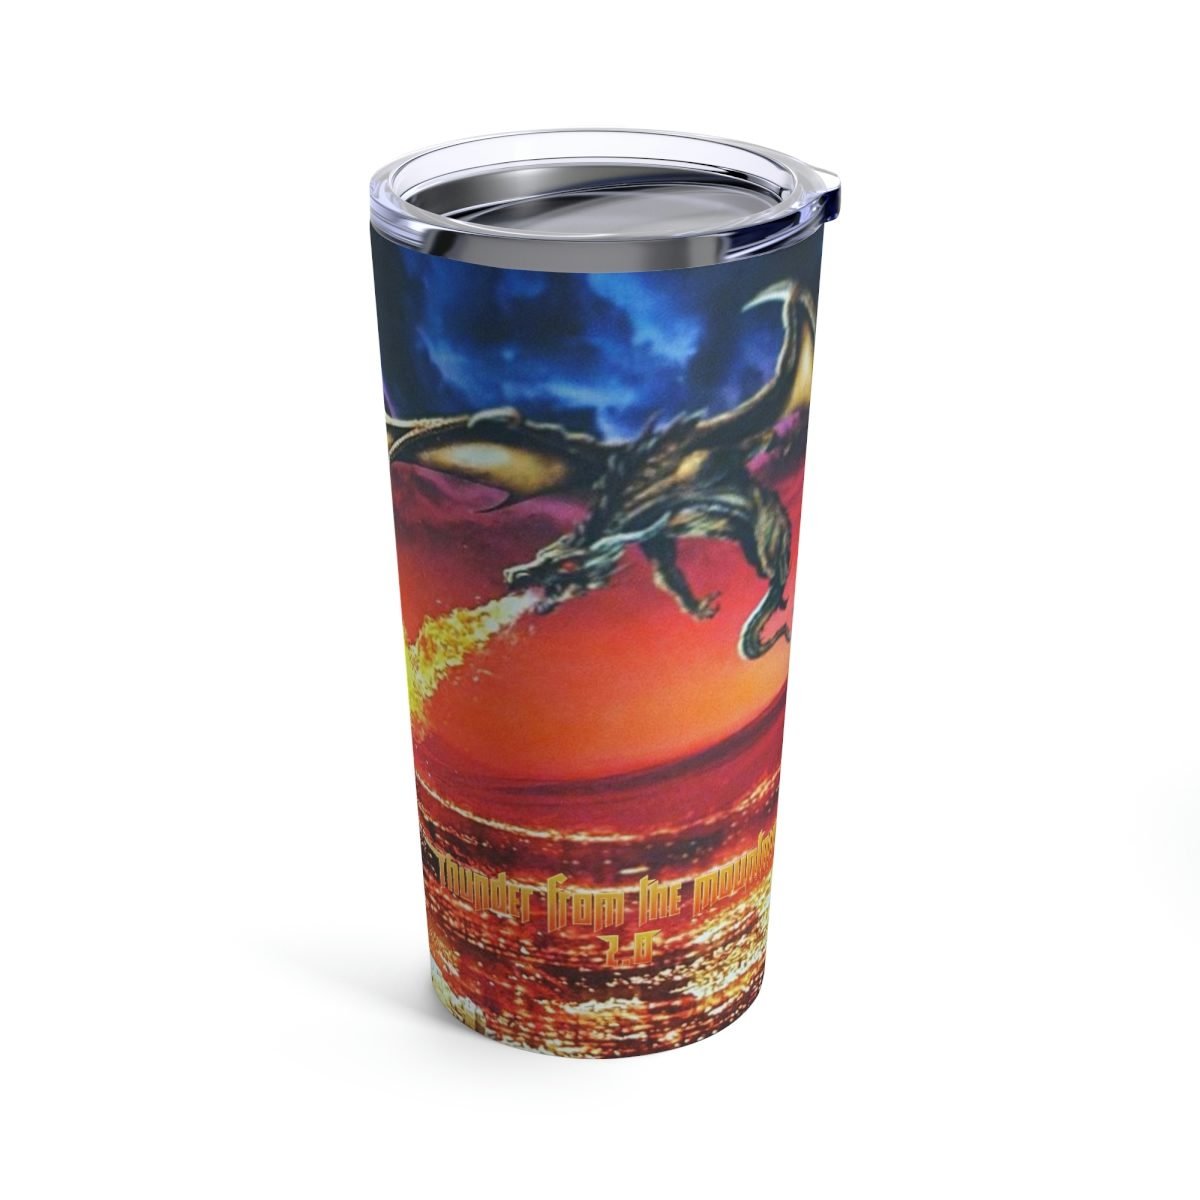 Zion – Thunder From The Mountain 2.0 Full Print 20oz Stainless Steel Tumbler